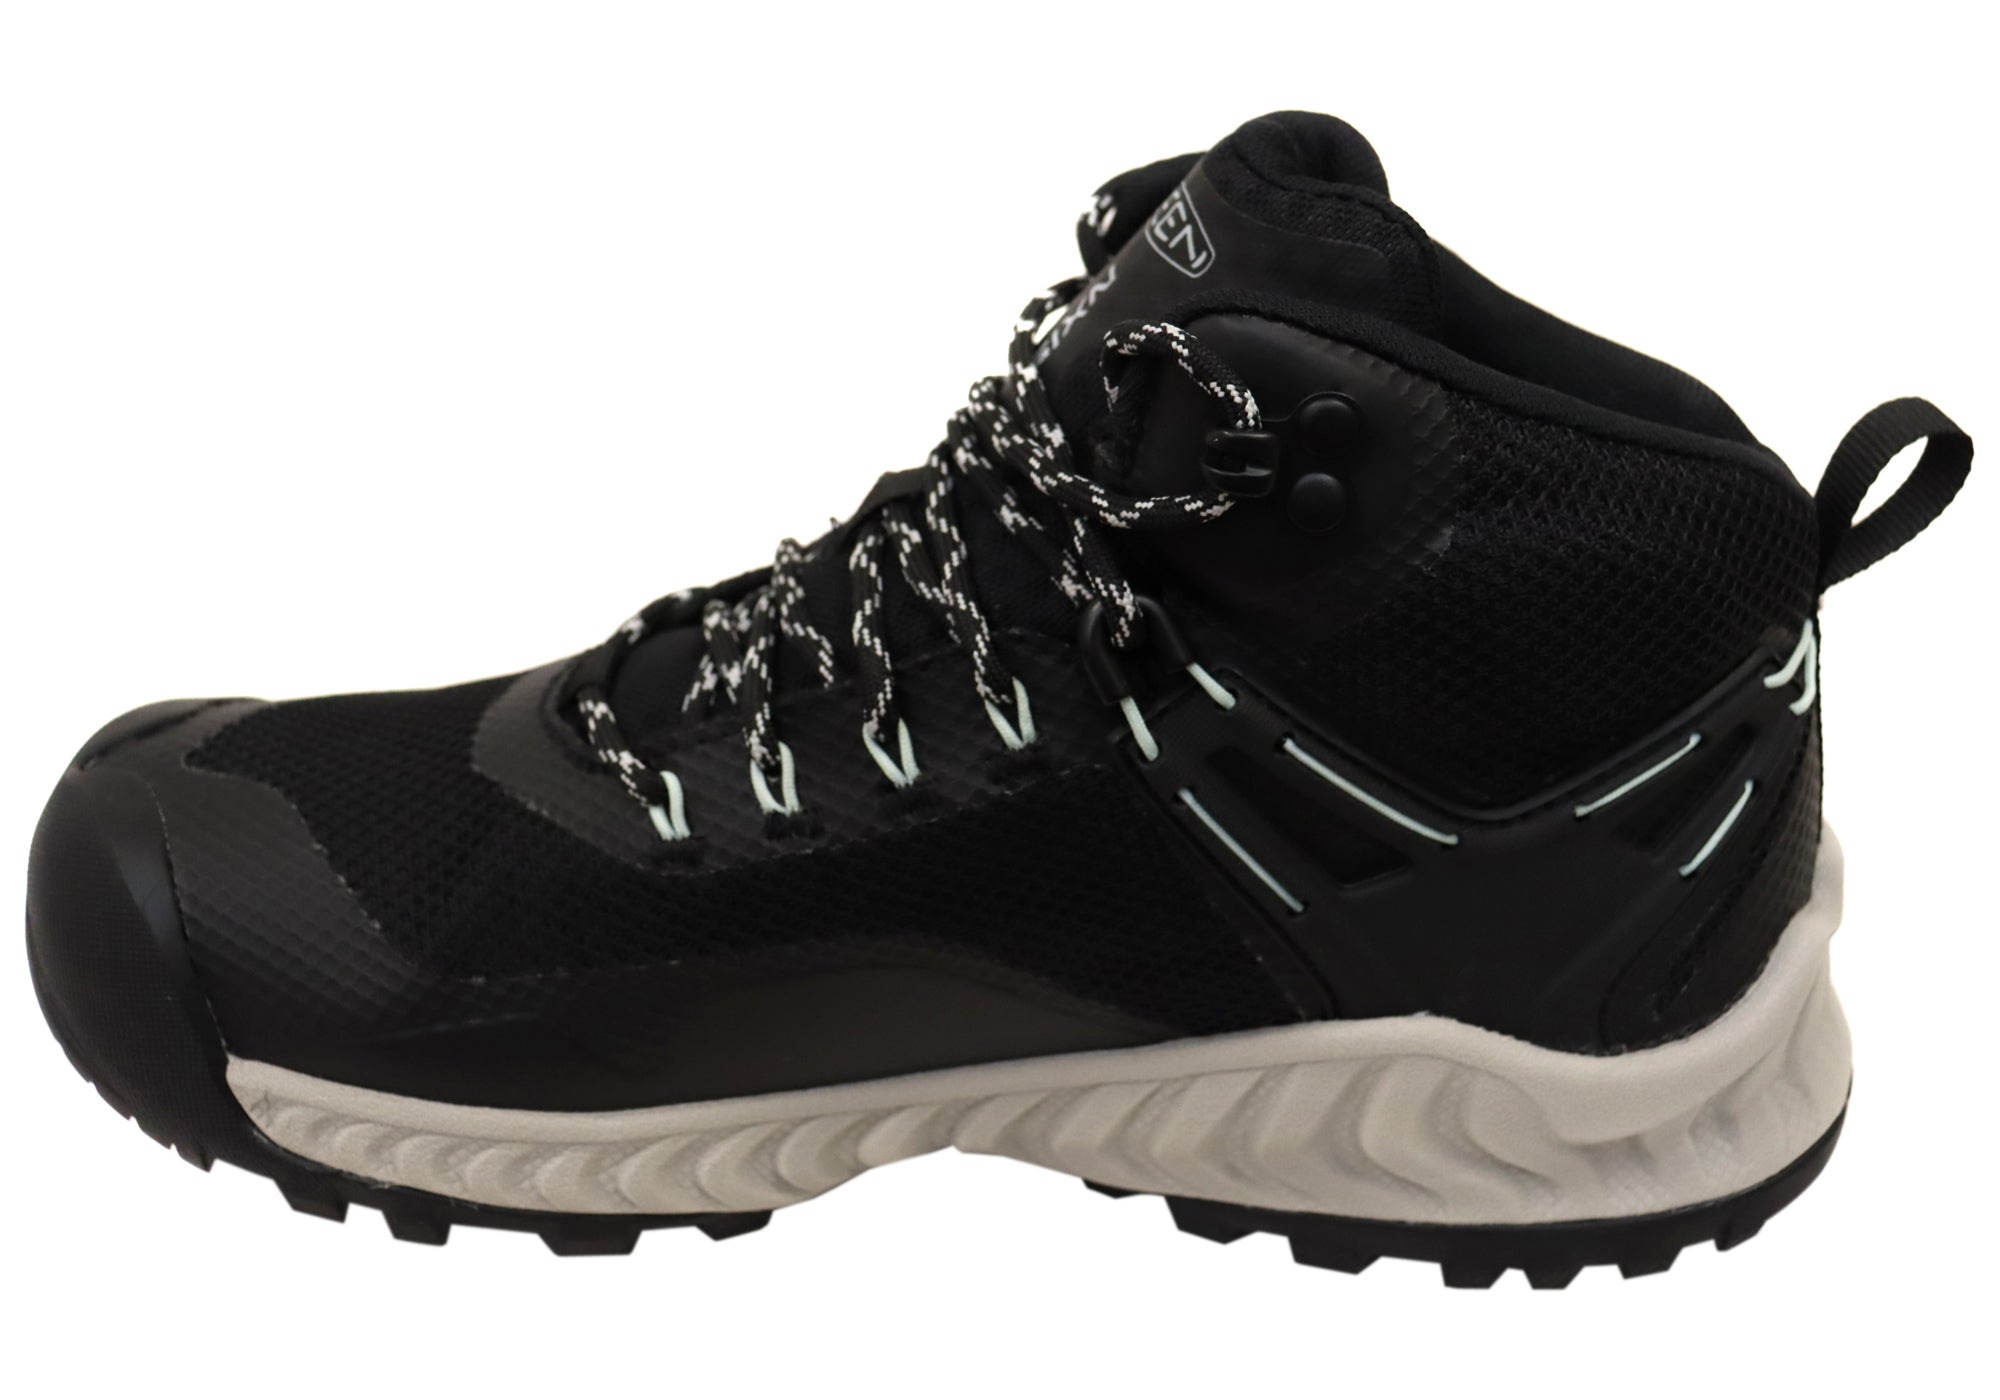 Keen Womens Comfortable Lace Up NXIS EVO Mid Waterproof Boots